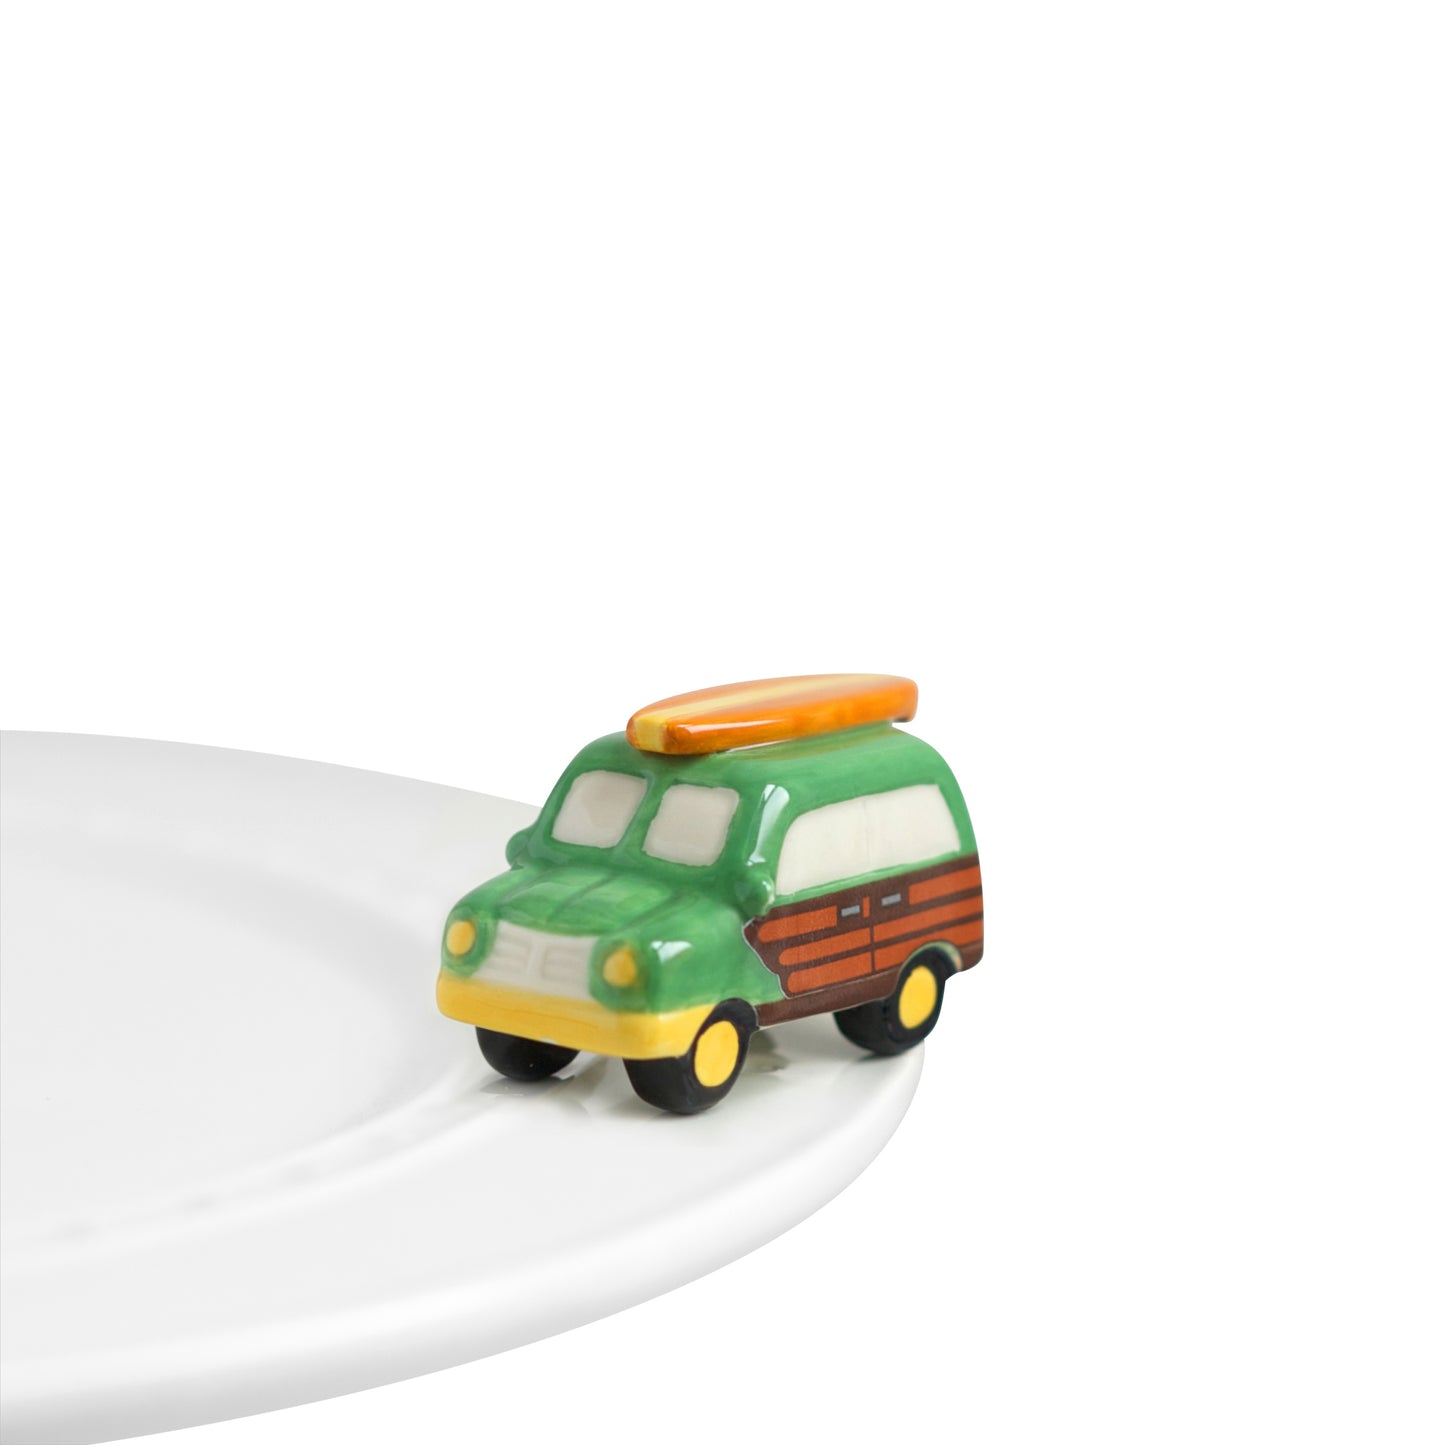 Nora fleming mini mini figure ceramic minis gift present woody station wagon "surf's up!" summer surf beach vacation vintage endless summer